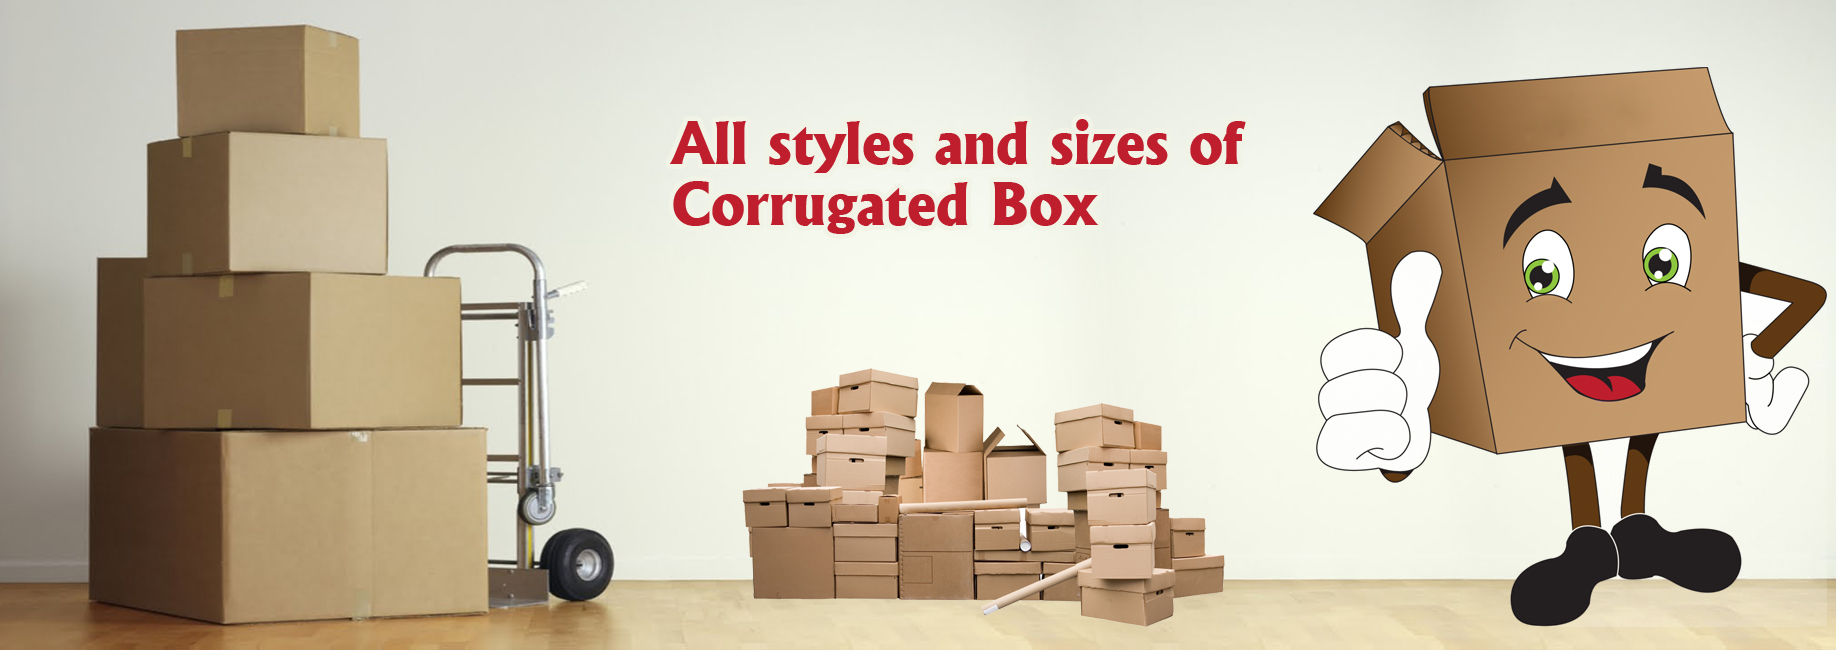 Product safety and encouraging presentation through corrugated boxes